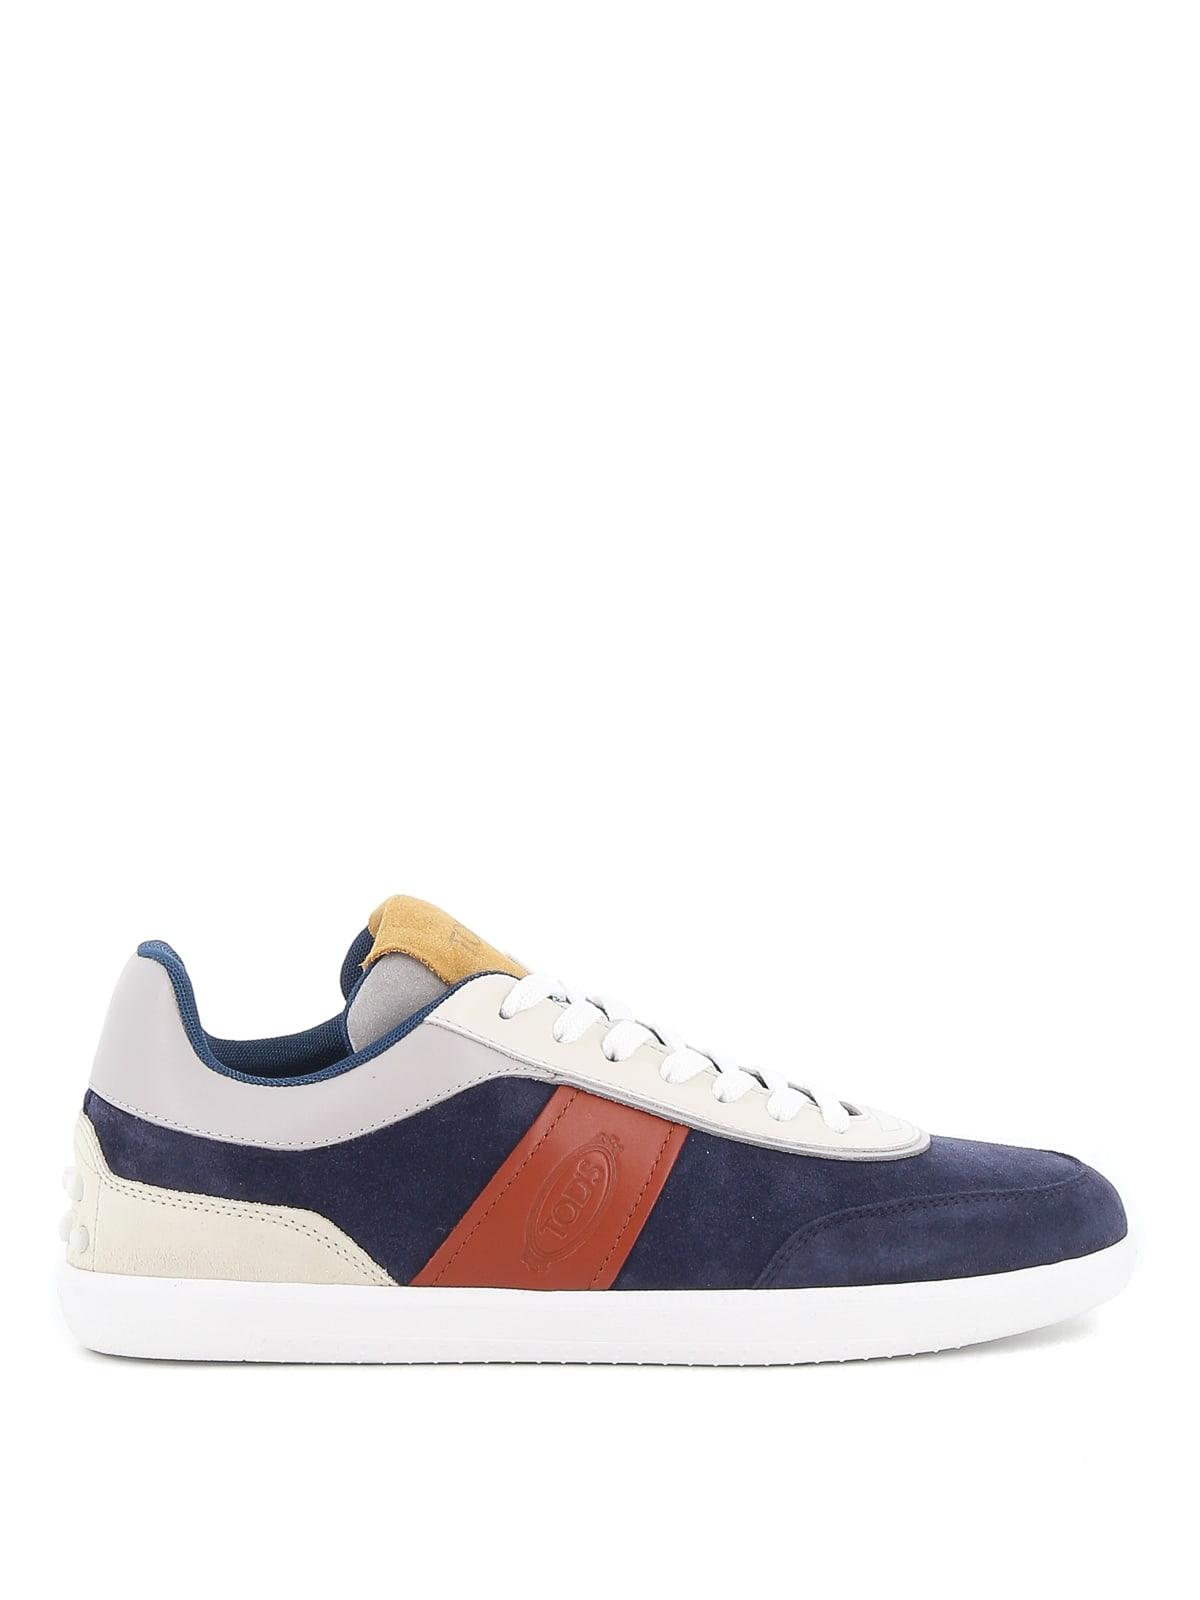 Tod's Tabs Sneakers In Suede Leather - Blue, Brown, White for Men | Lyst